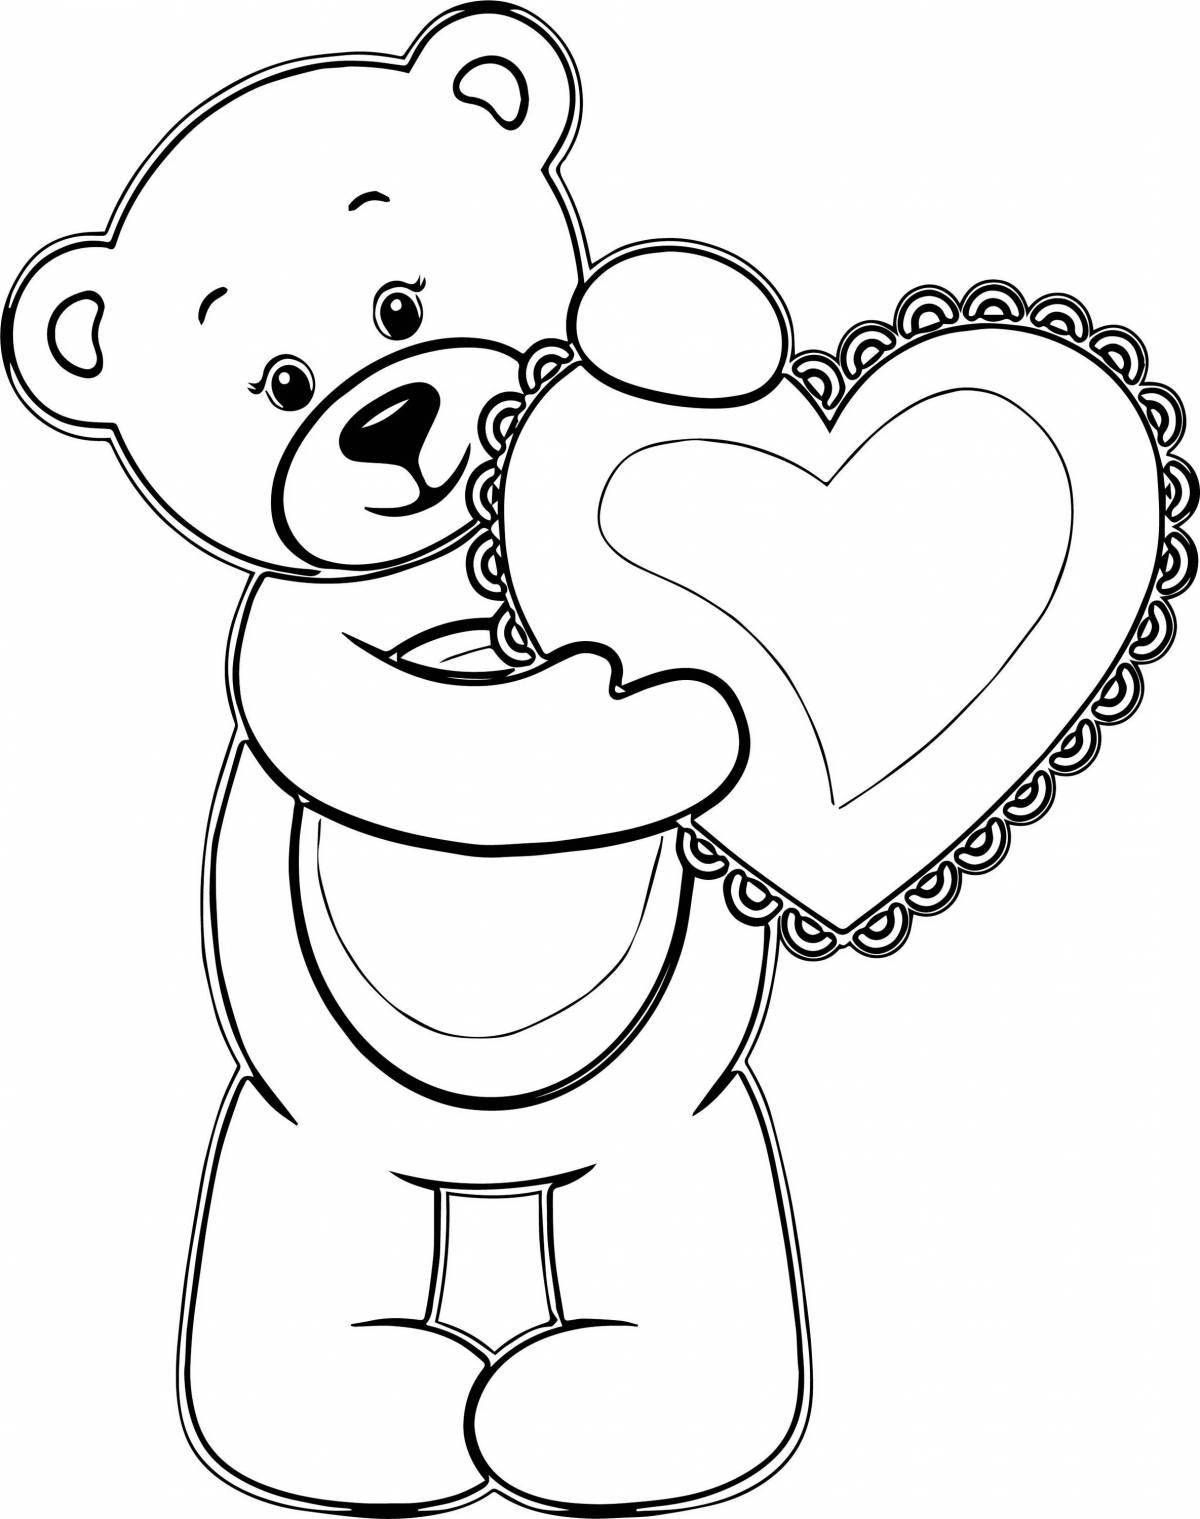 Coloring book funny bear with a heart